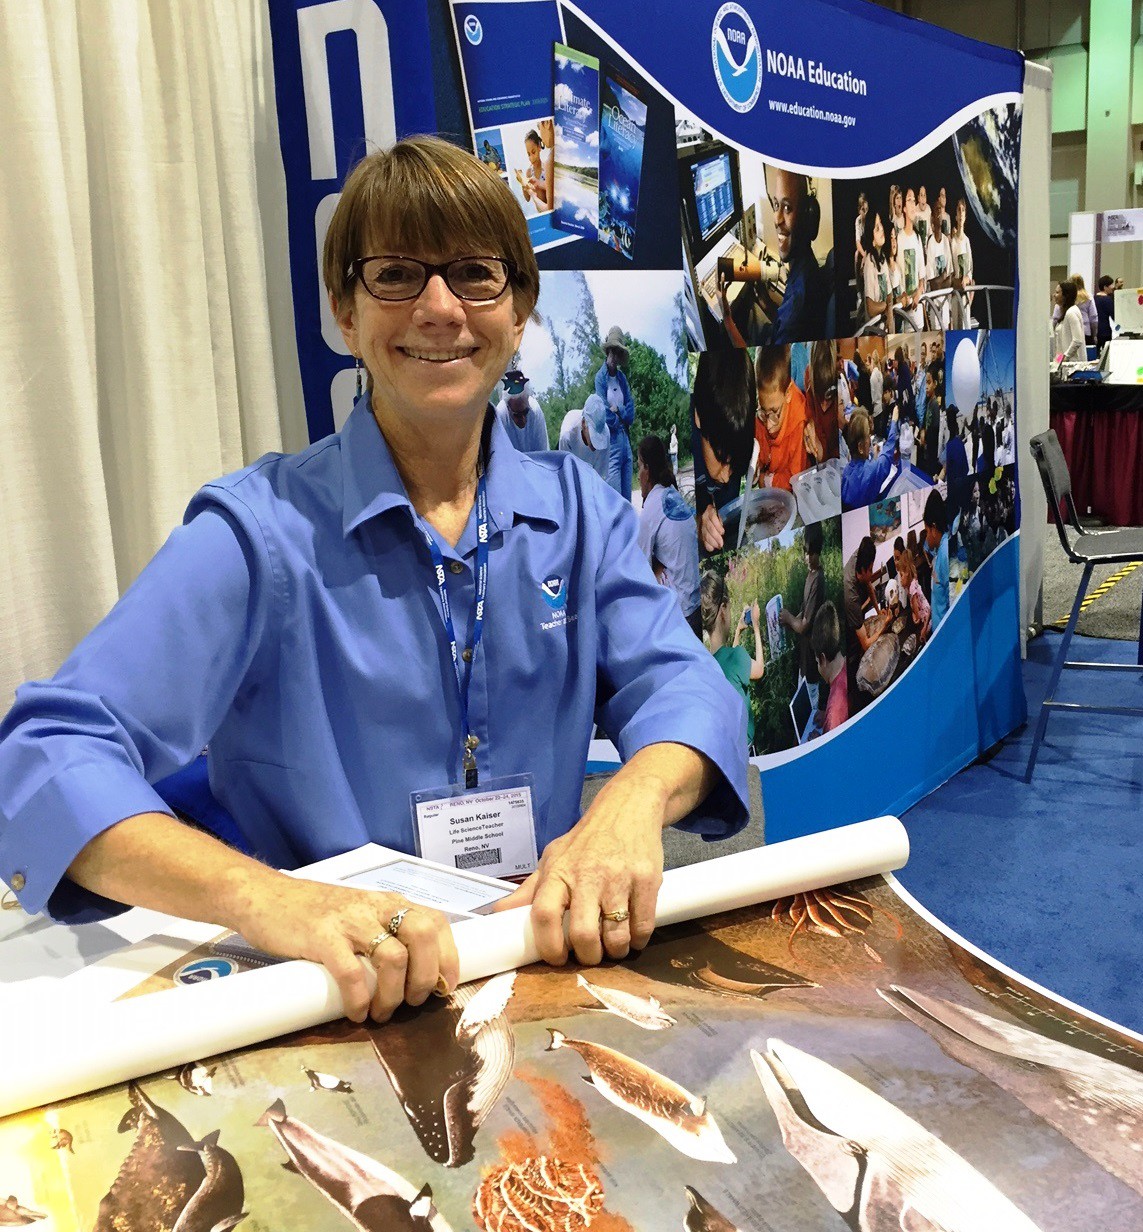 A woman sitting in front of a NOAA Education Booth banner, while she rolls up posters.